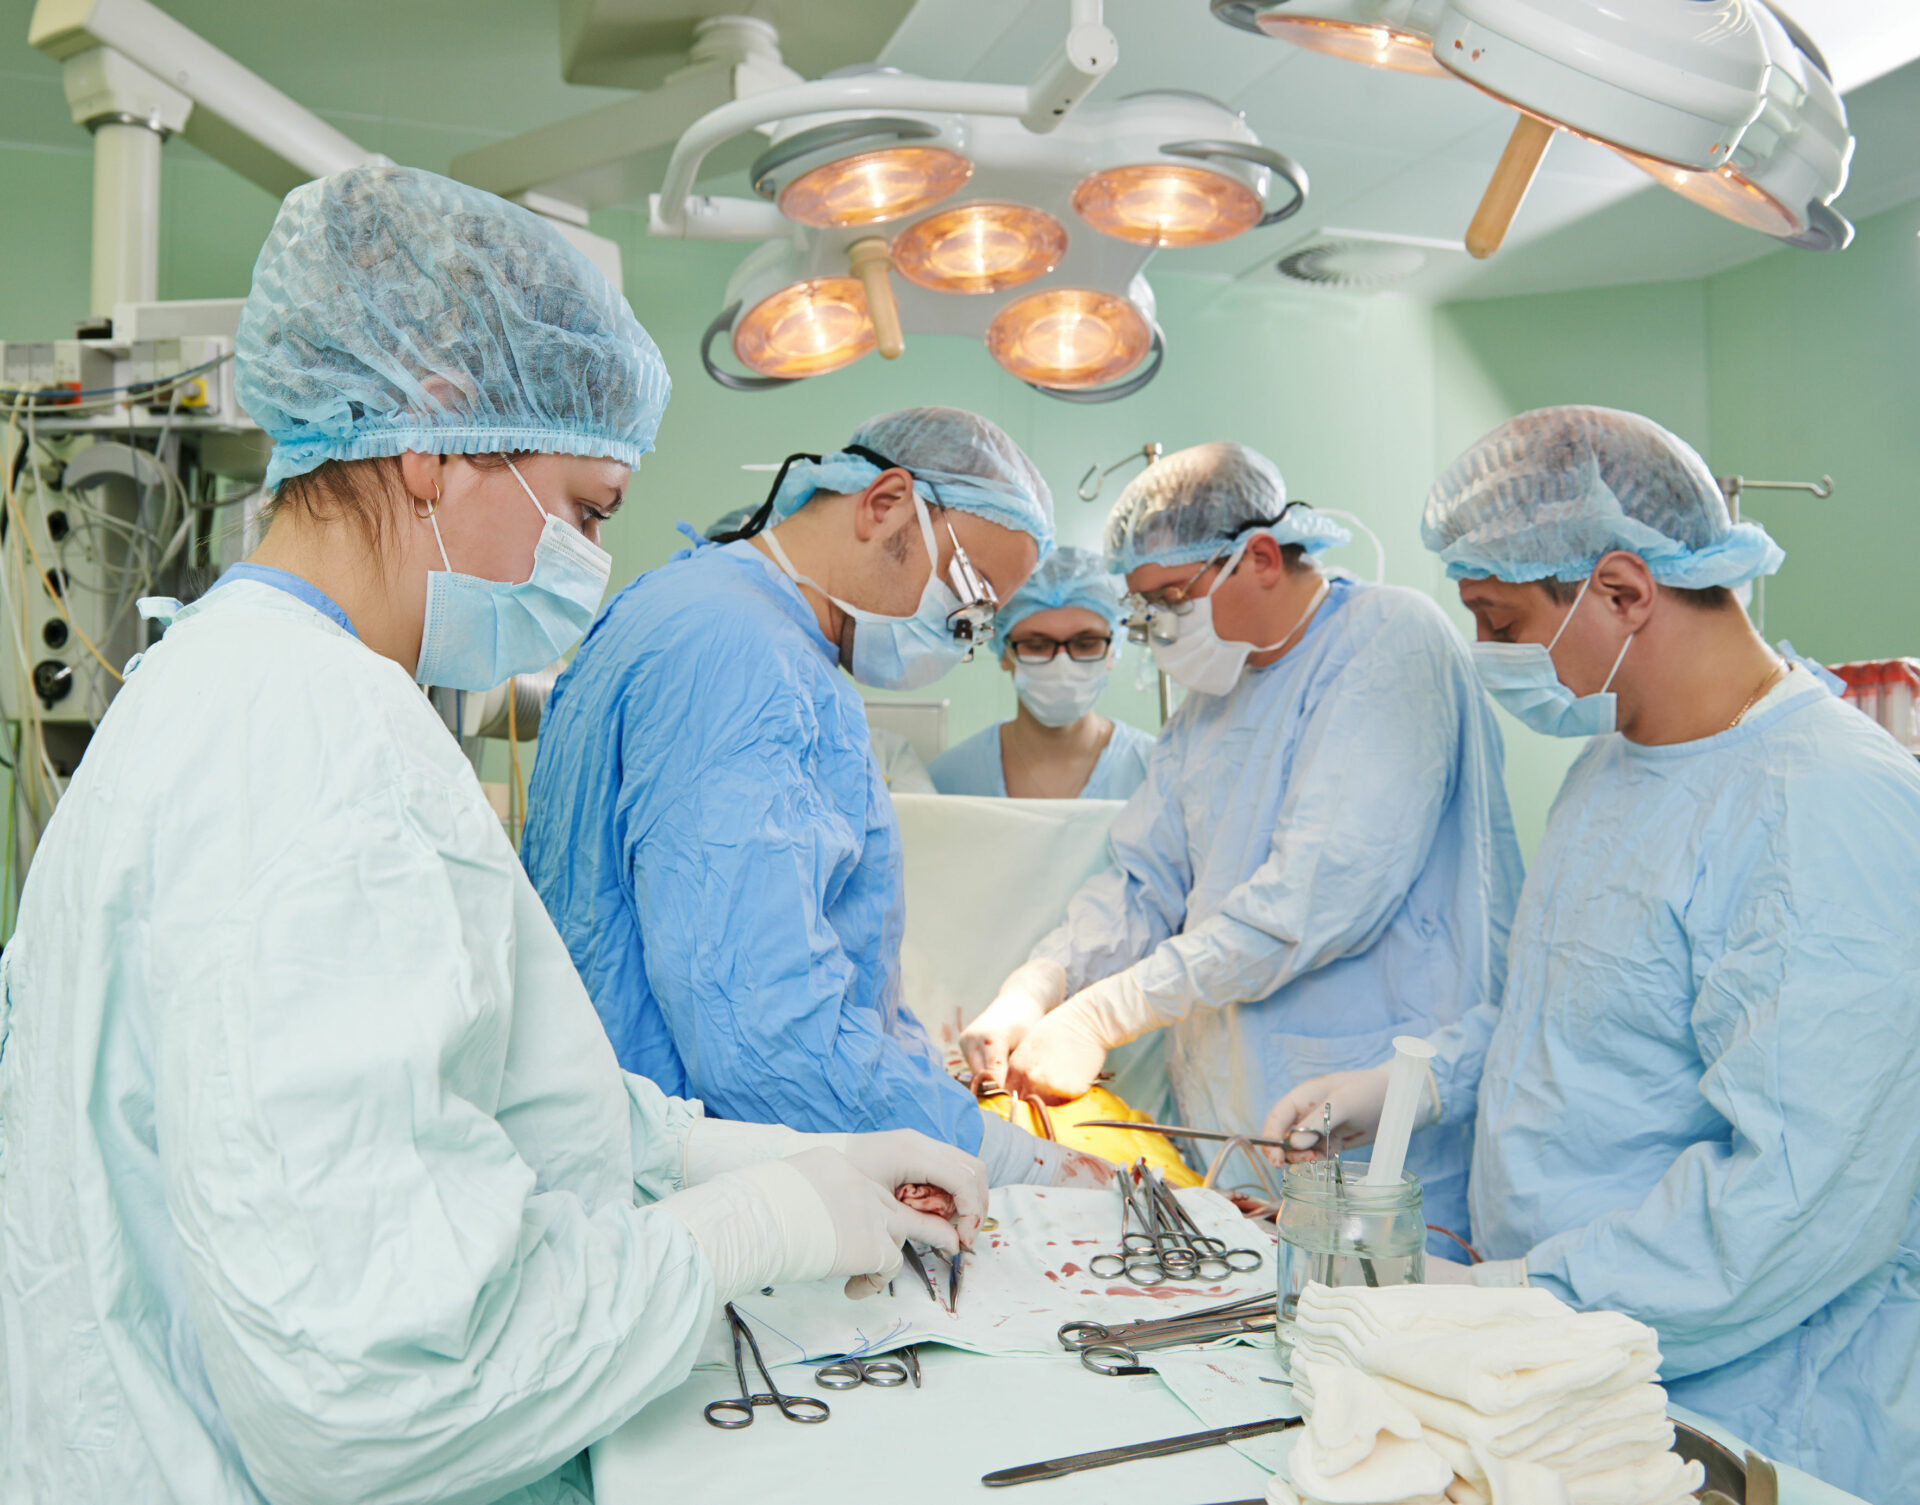 36915604 - team of surgeon in uniform perform heart transplantation operation on a patient at cardiac surgery clinic